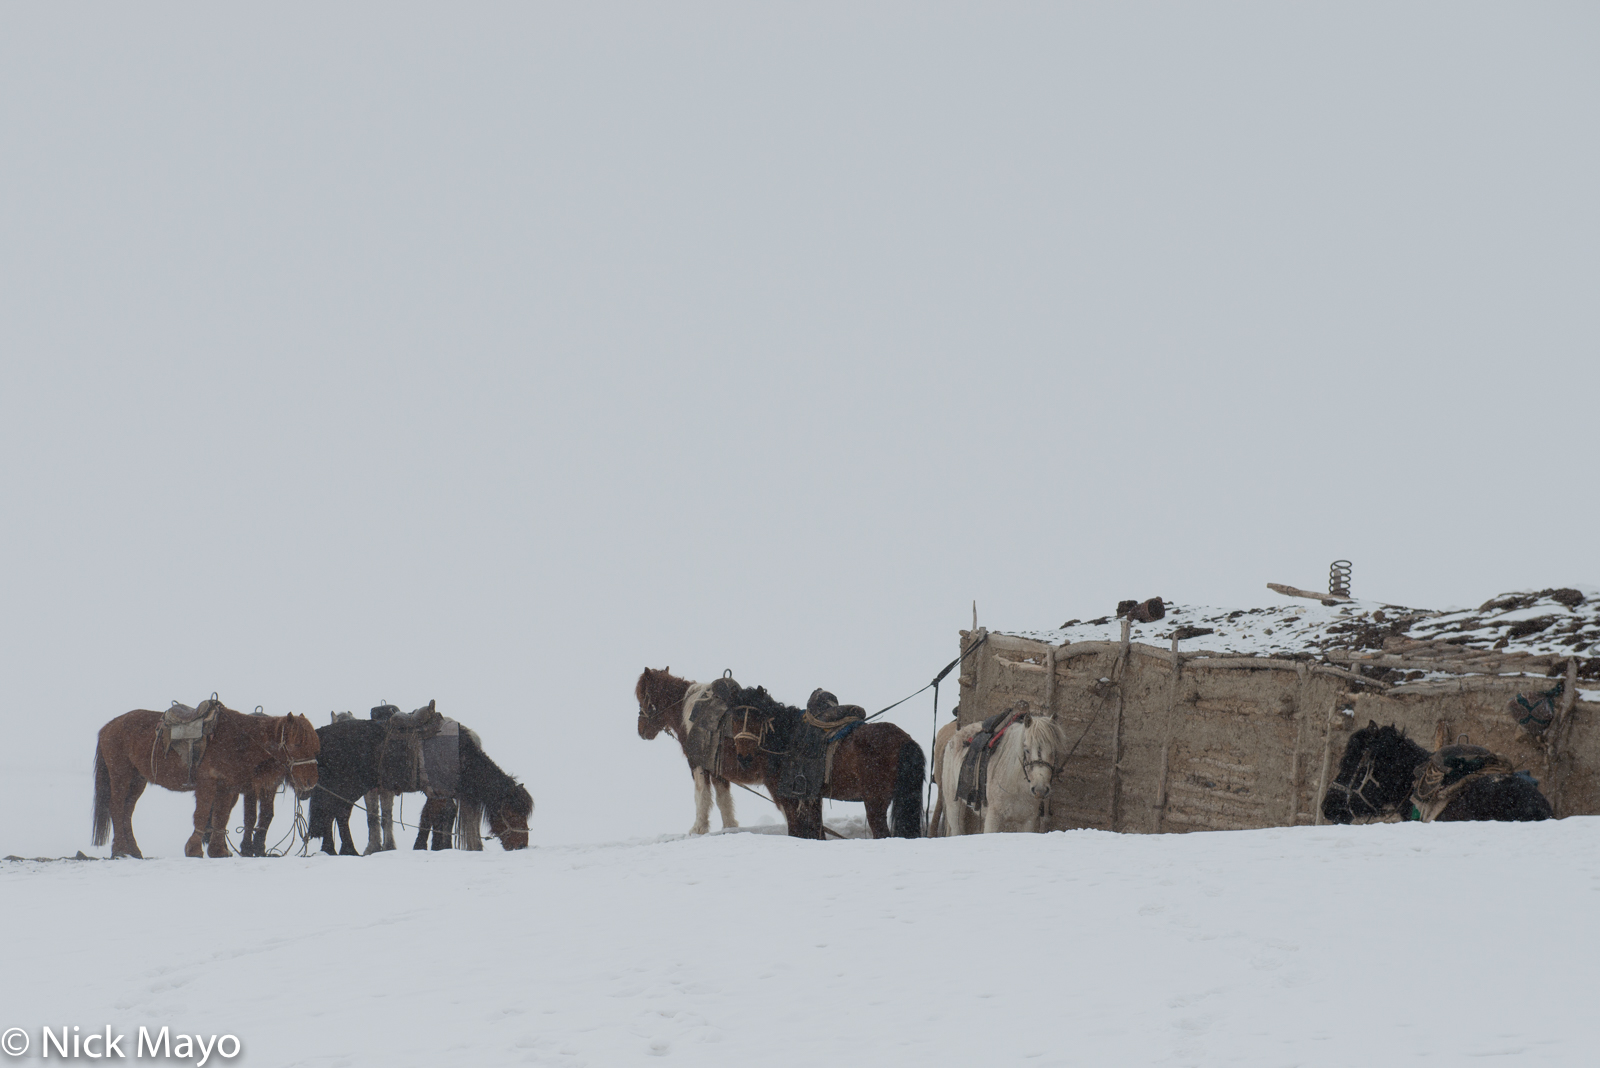 Horses tethered at a Kazakh homestead in Ulaakhus sum during a spring snow storm.